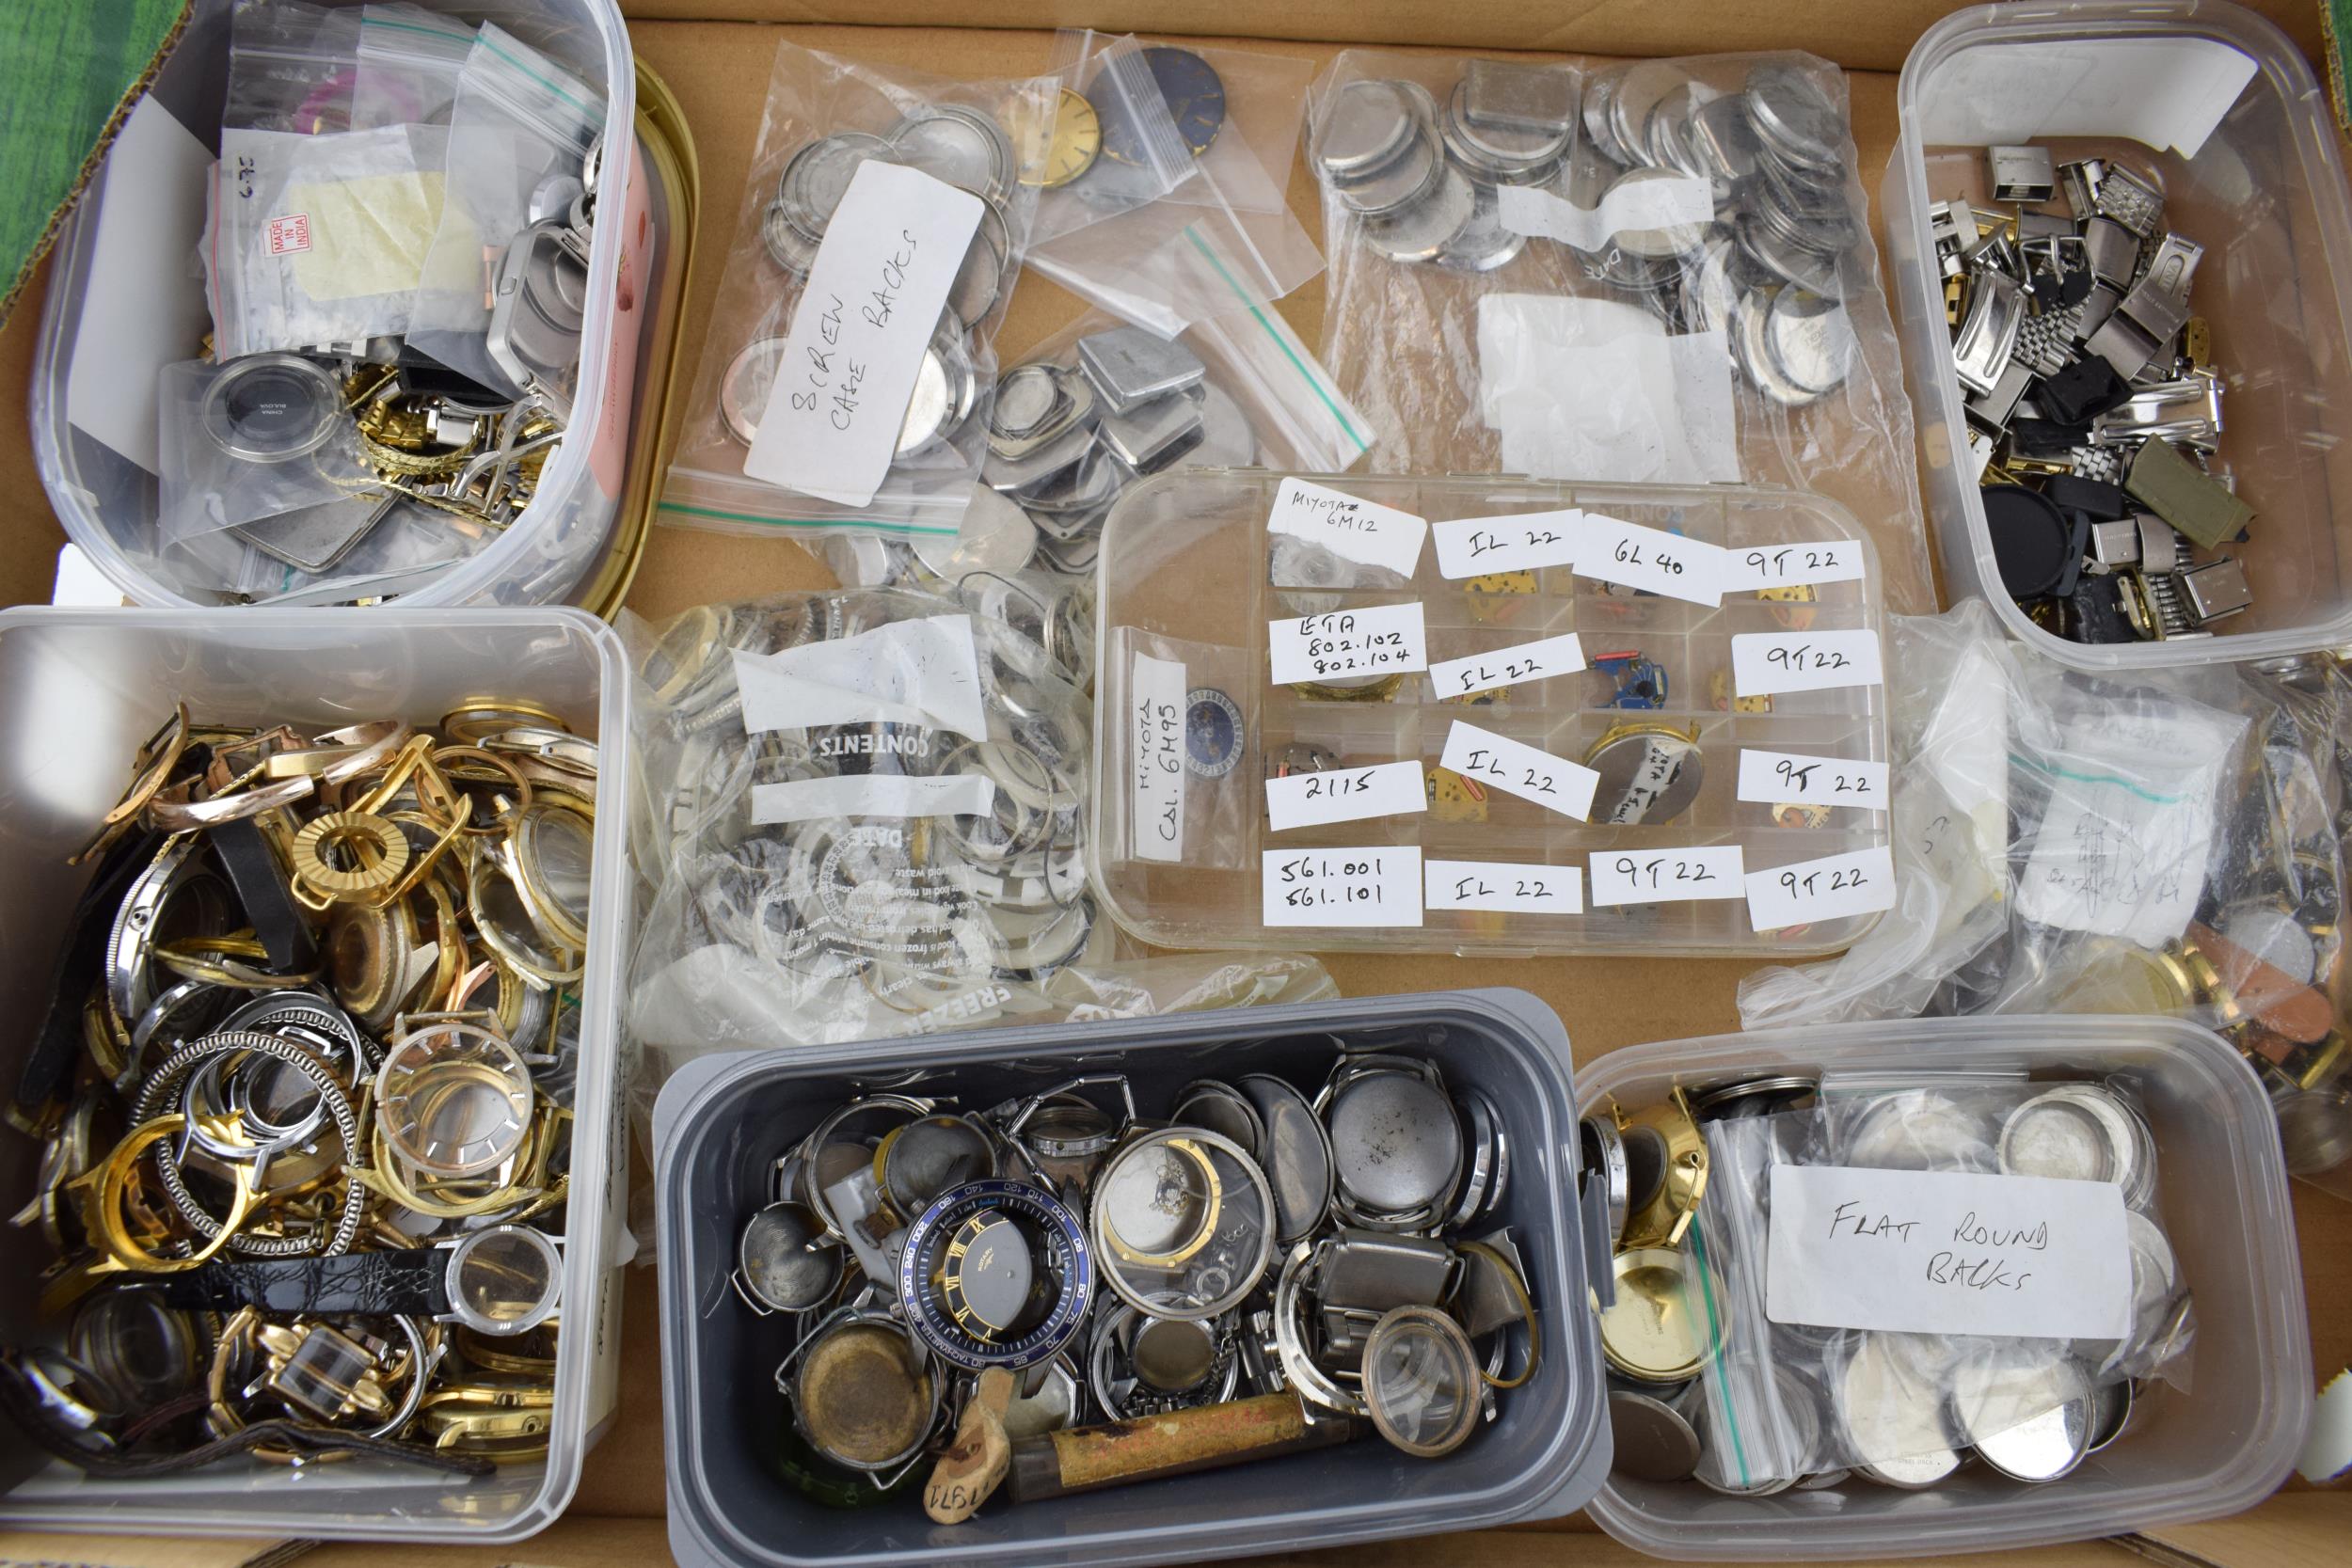 A large collection of watch parts to include bezels, quartz movements, watch backs and links. A good